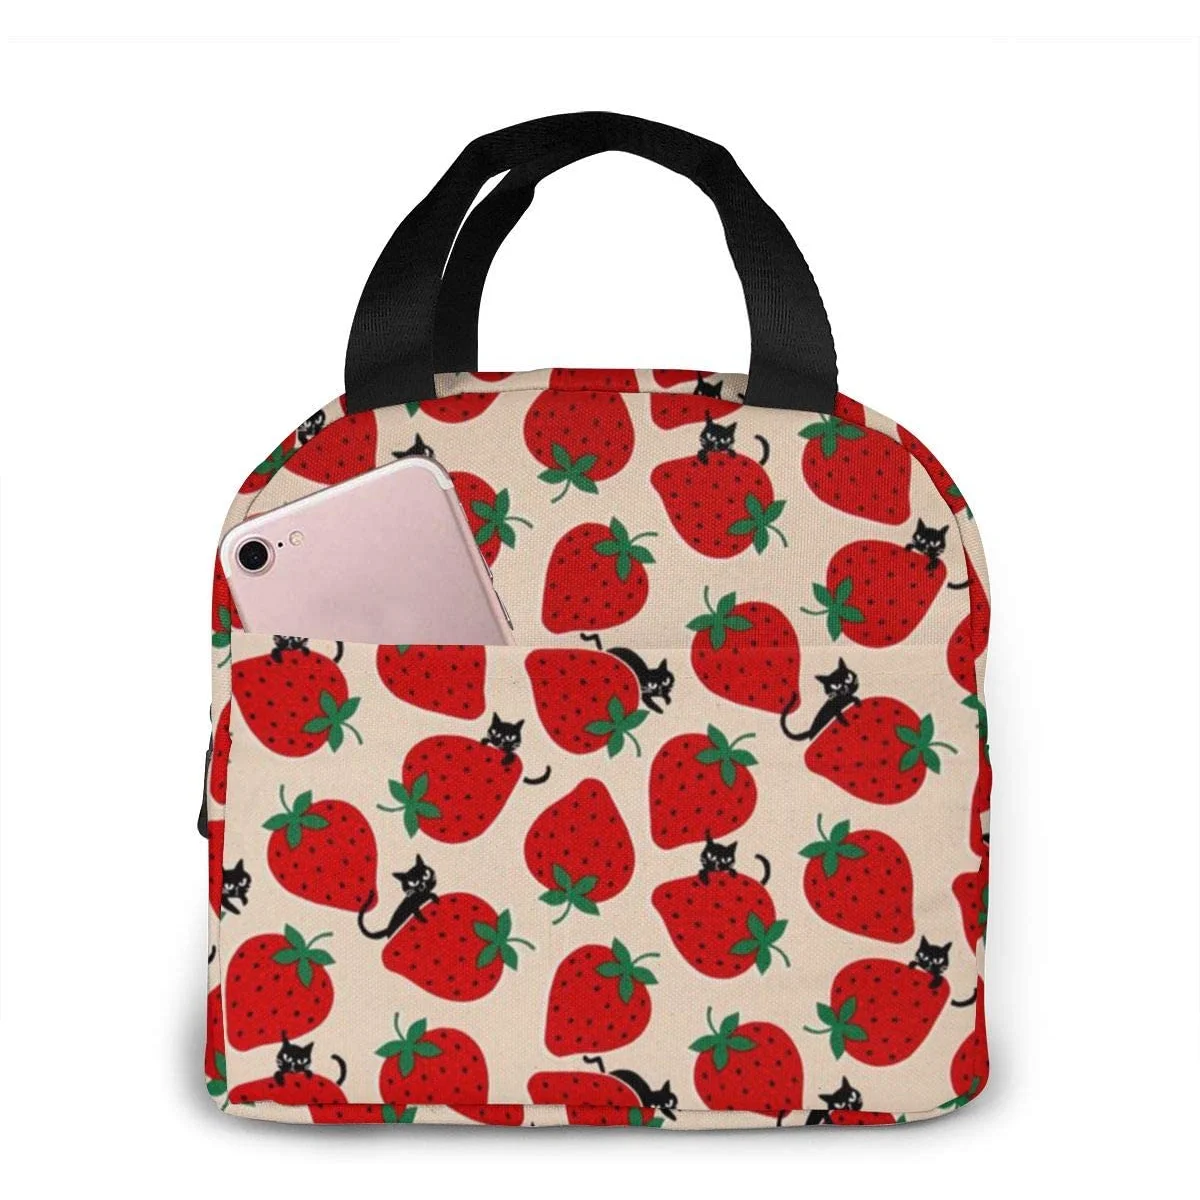 

Black Cat On Red Strawberry Lunch Bag For Women Girls Kids Insulated Picnic Pouch Thermal Bento Prep Cute Bag Lunch Box Camping